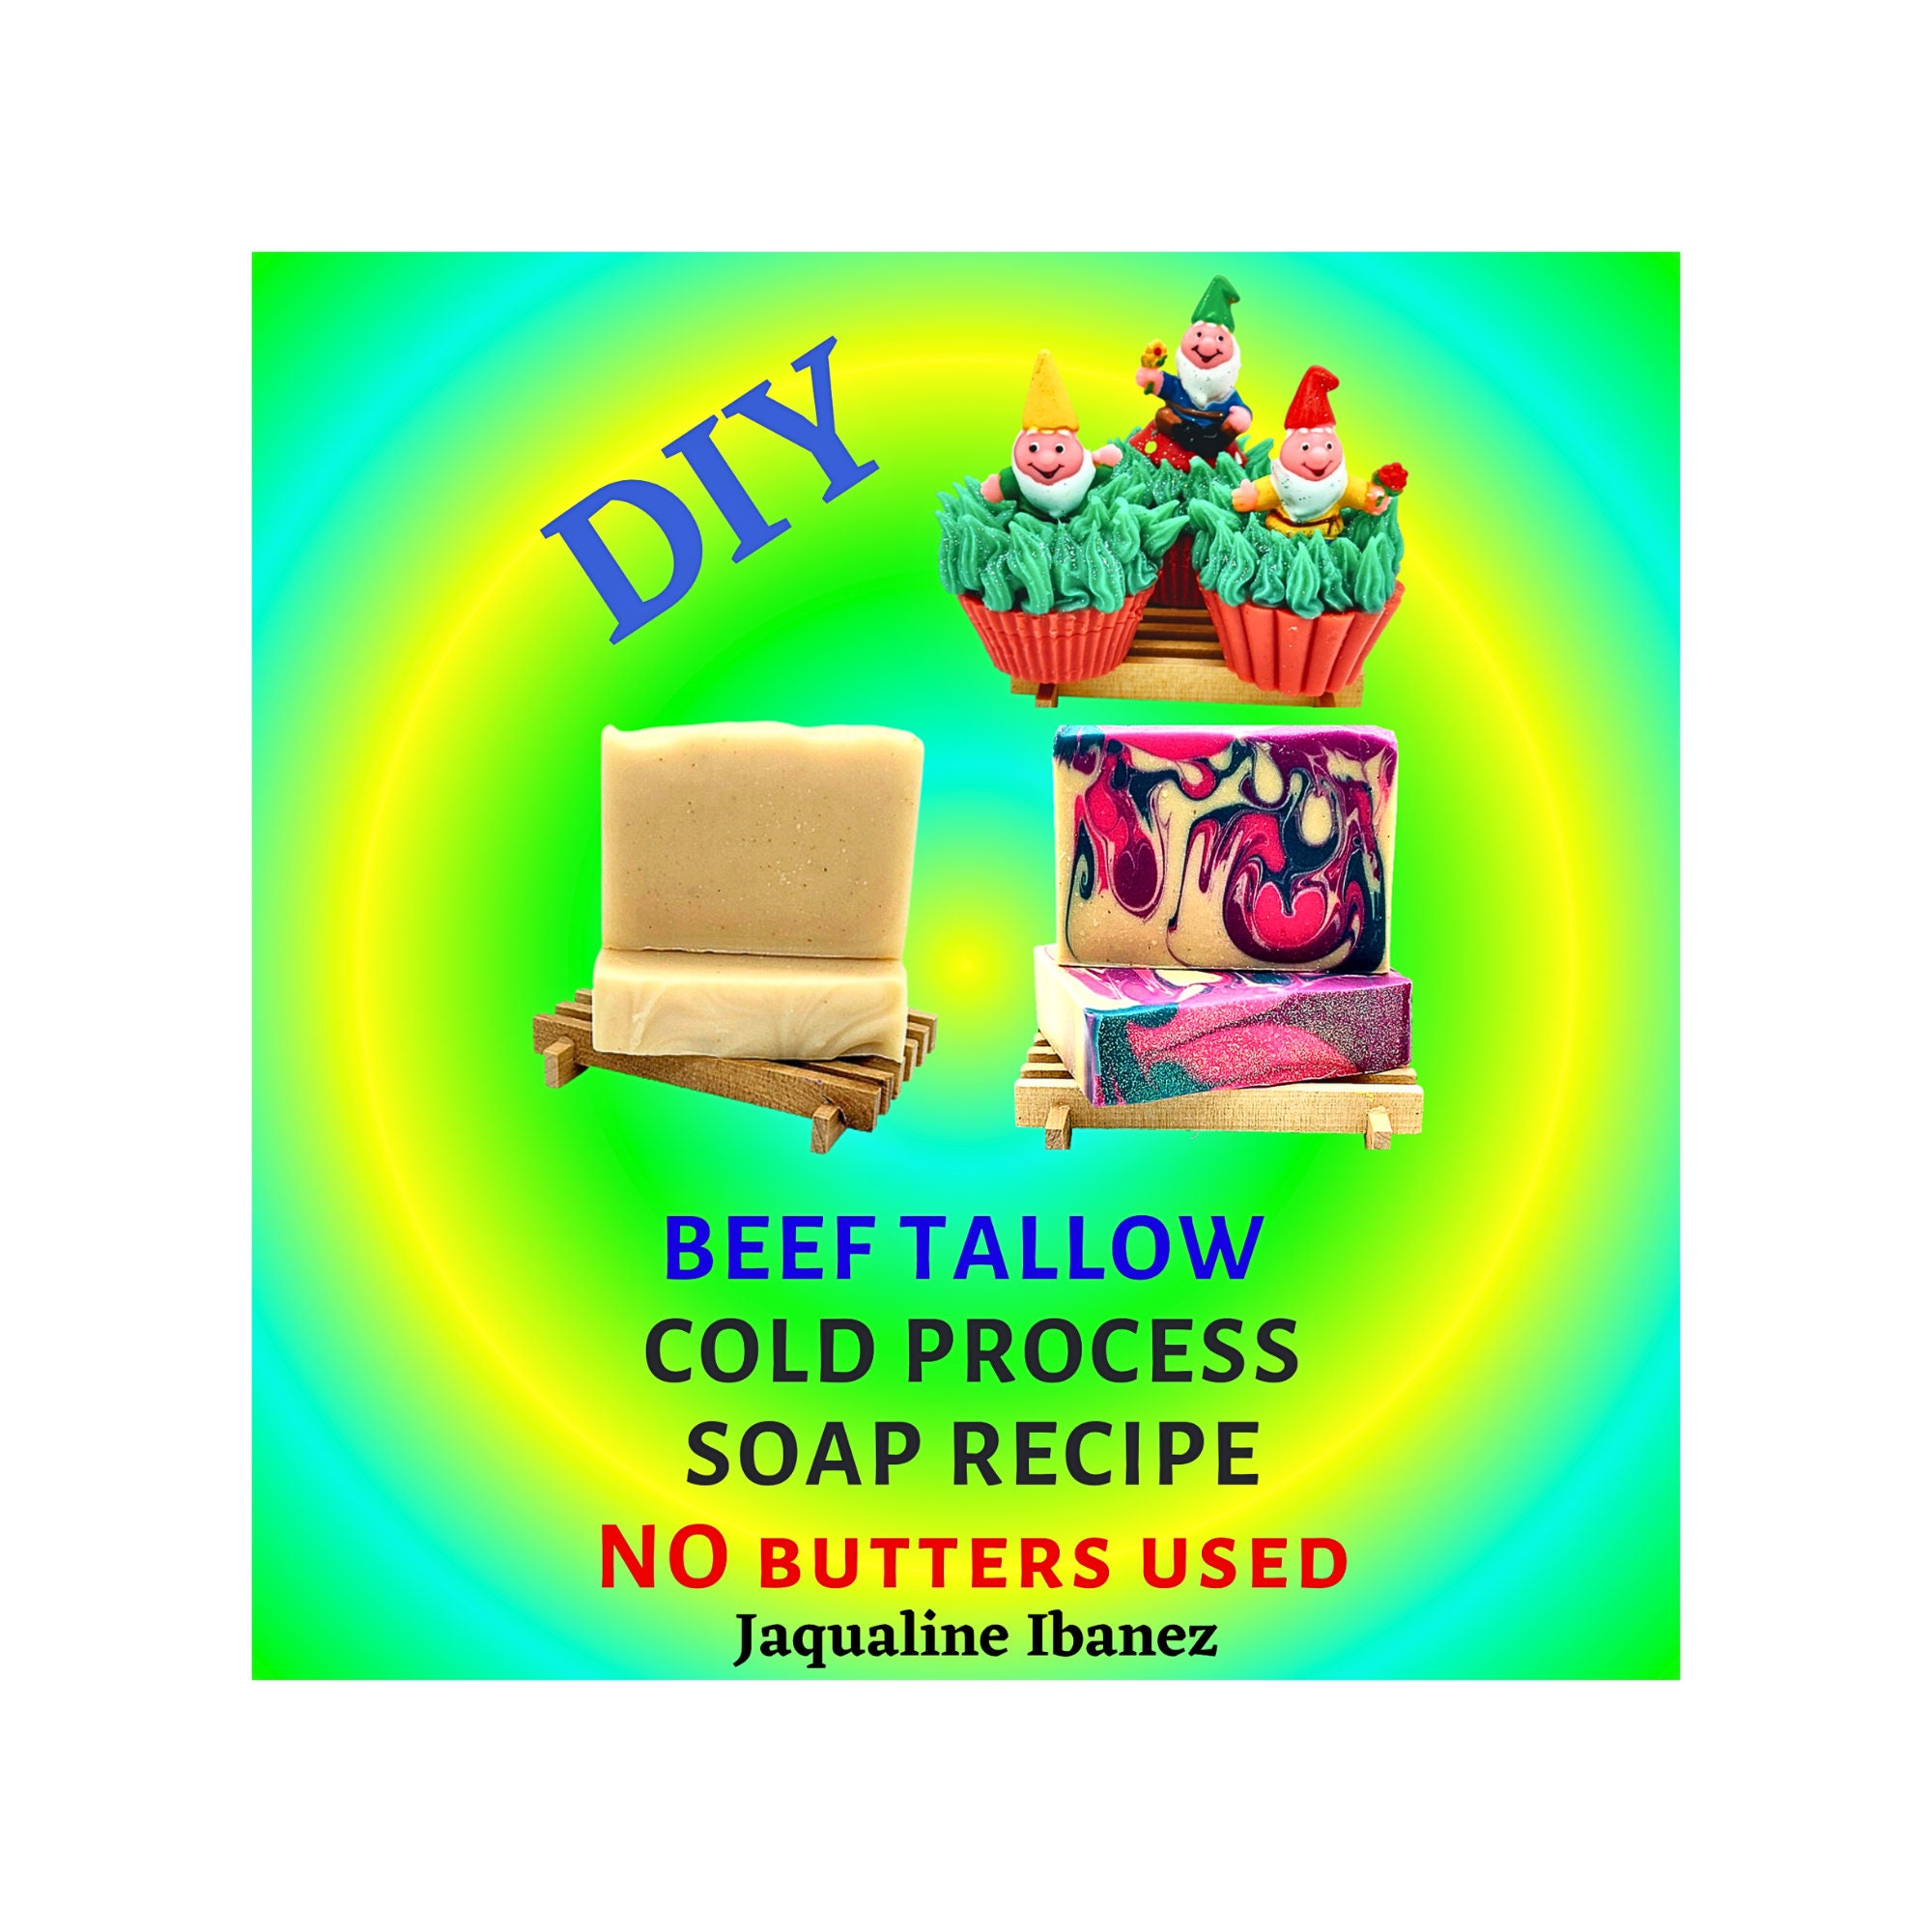 Coconut Oil Organic. Soap Making Supplies. 32 Fl Oz DIY Projects. Great for Soap  Making. 